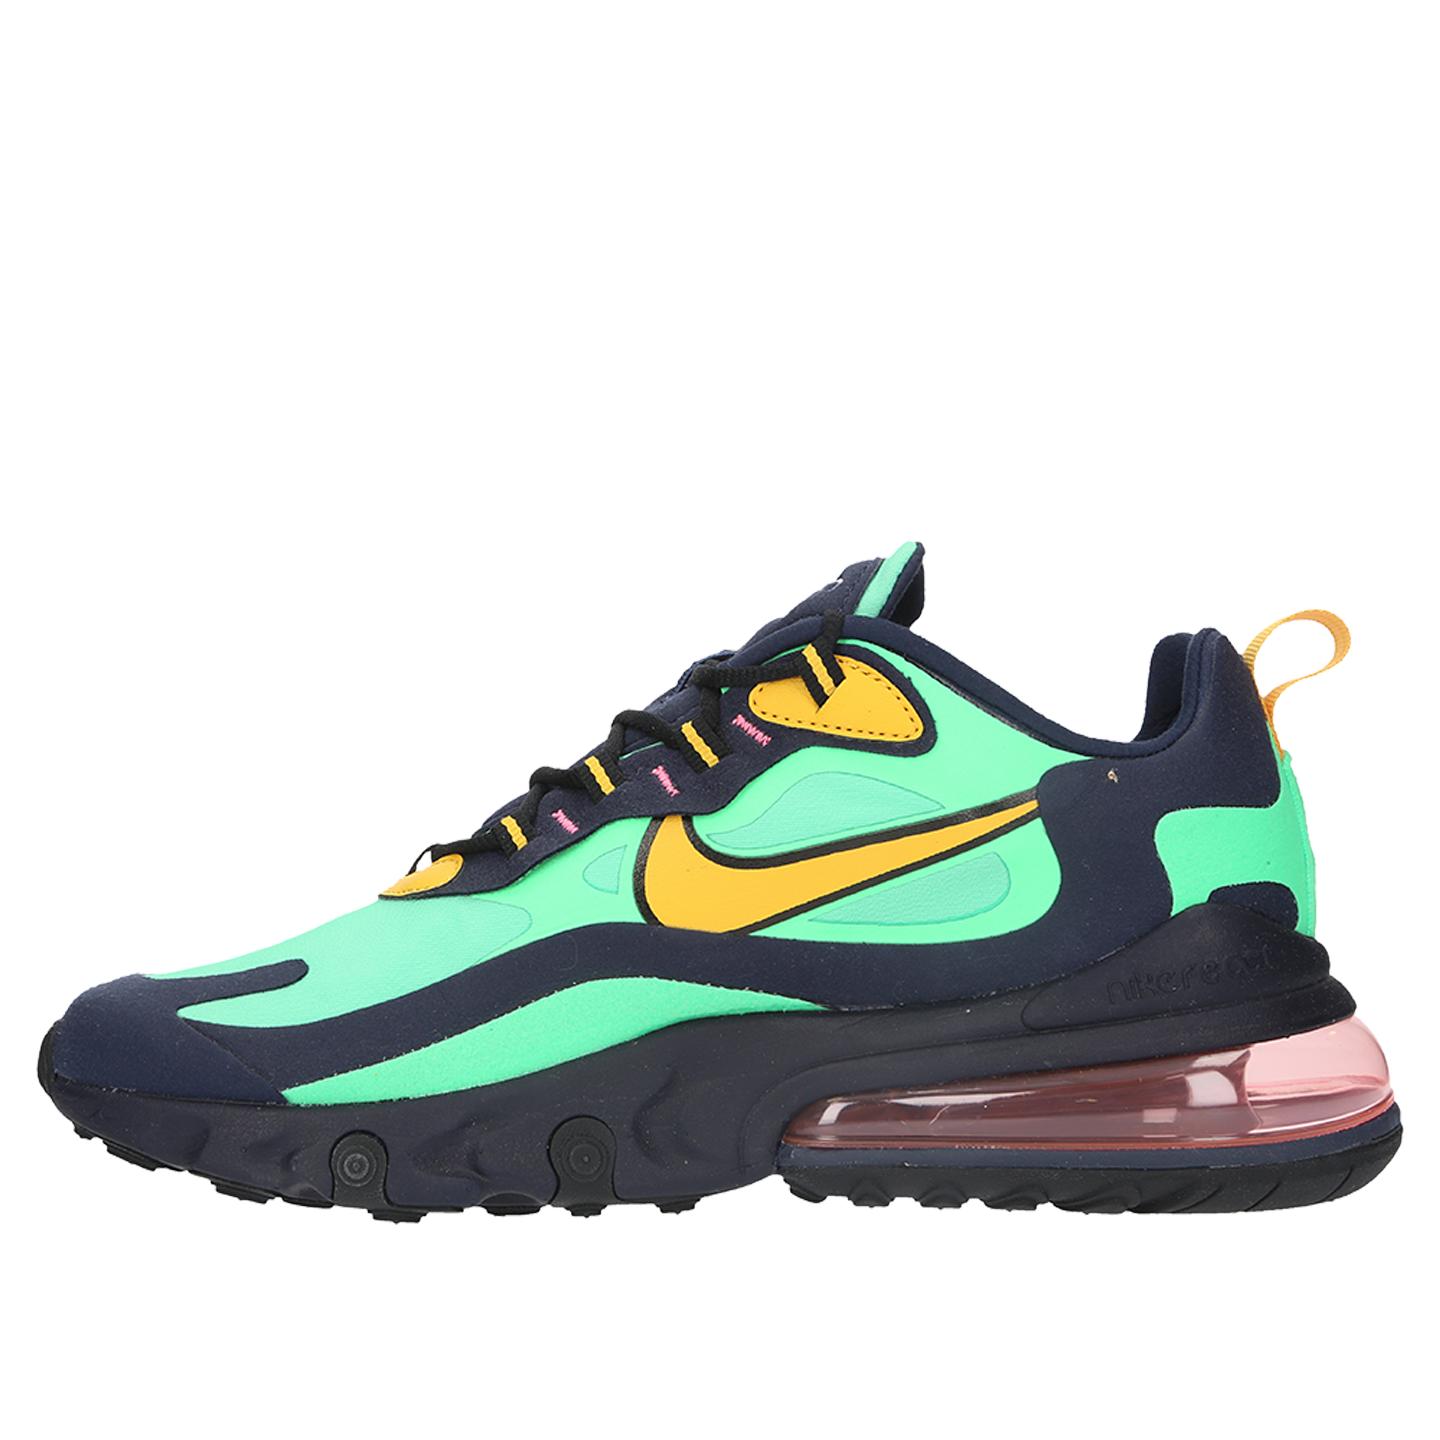 Nike Rubber Air Max 270 React Running Shoes in Green/Yellow (Green) for Men  - Lyst